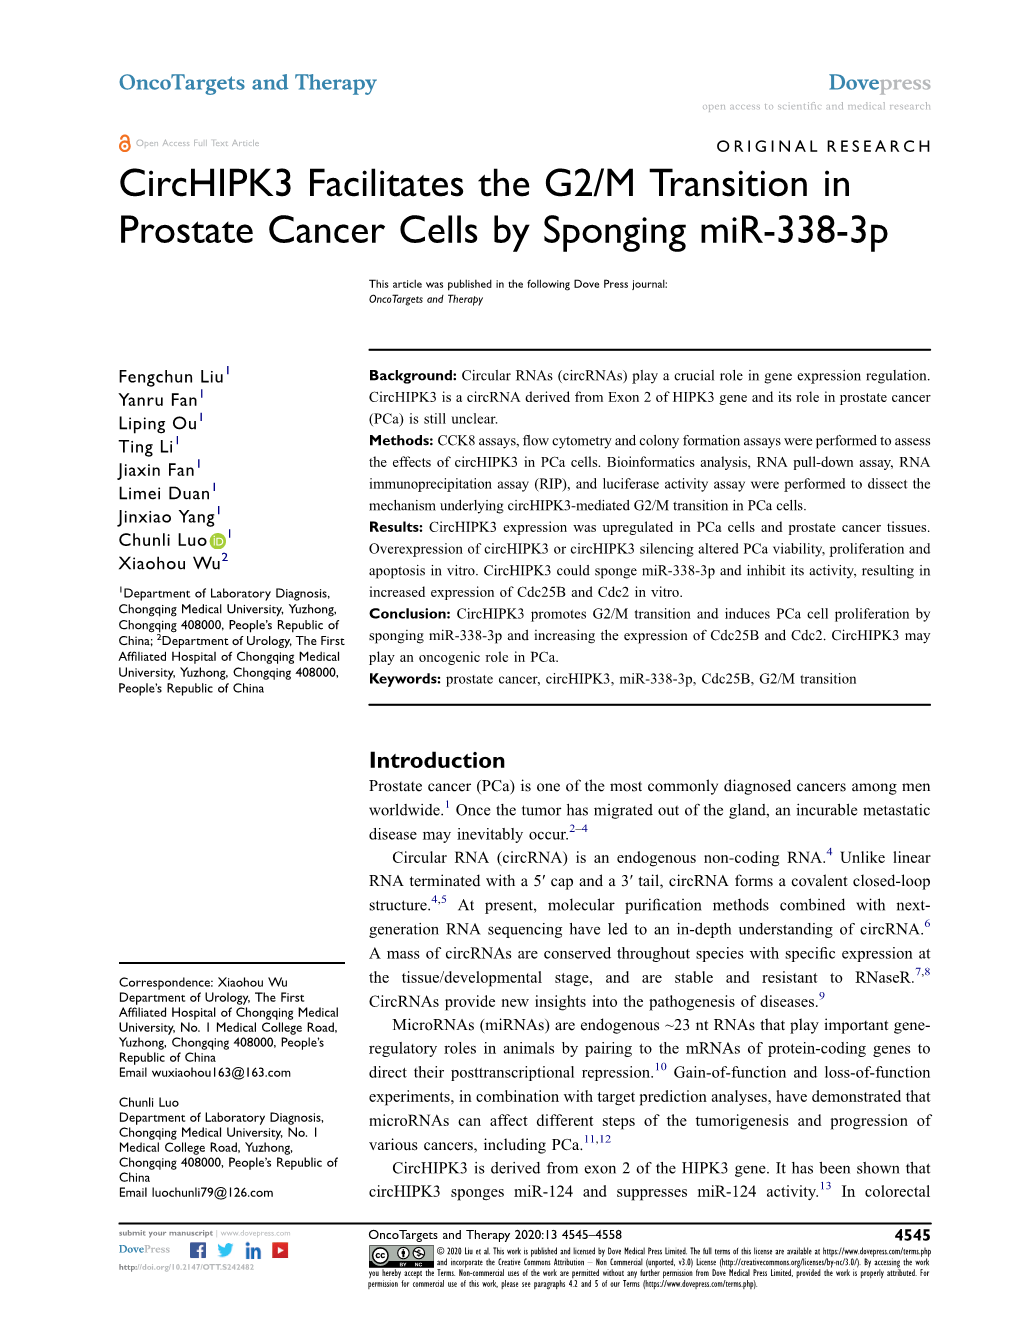 Circhipk3 Facilitates the G2/M Transition in Prostate Cancer Cells by Sponging Mir-338-3P